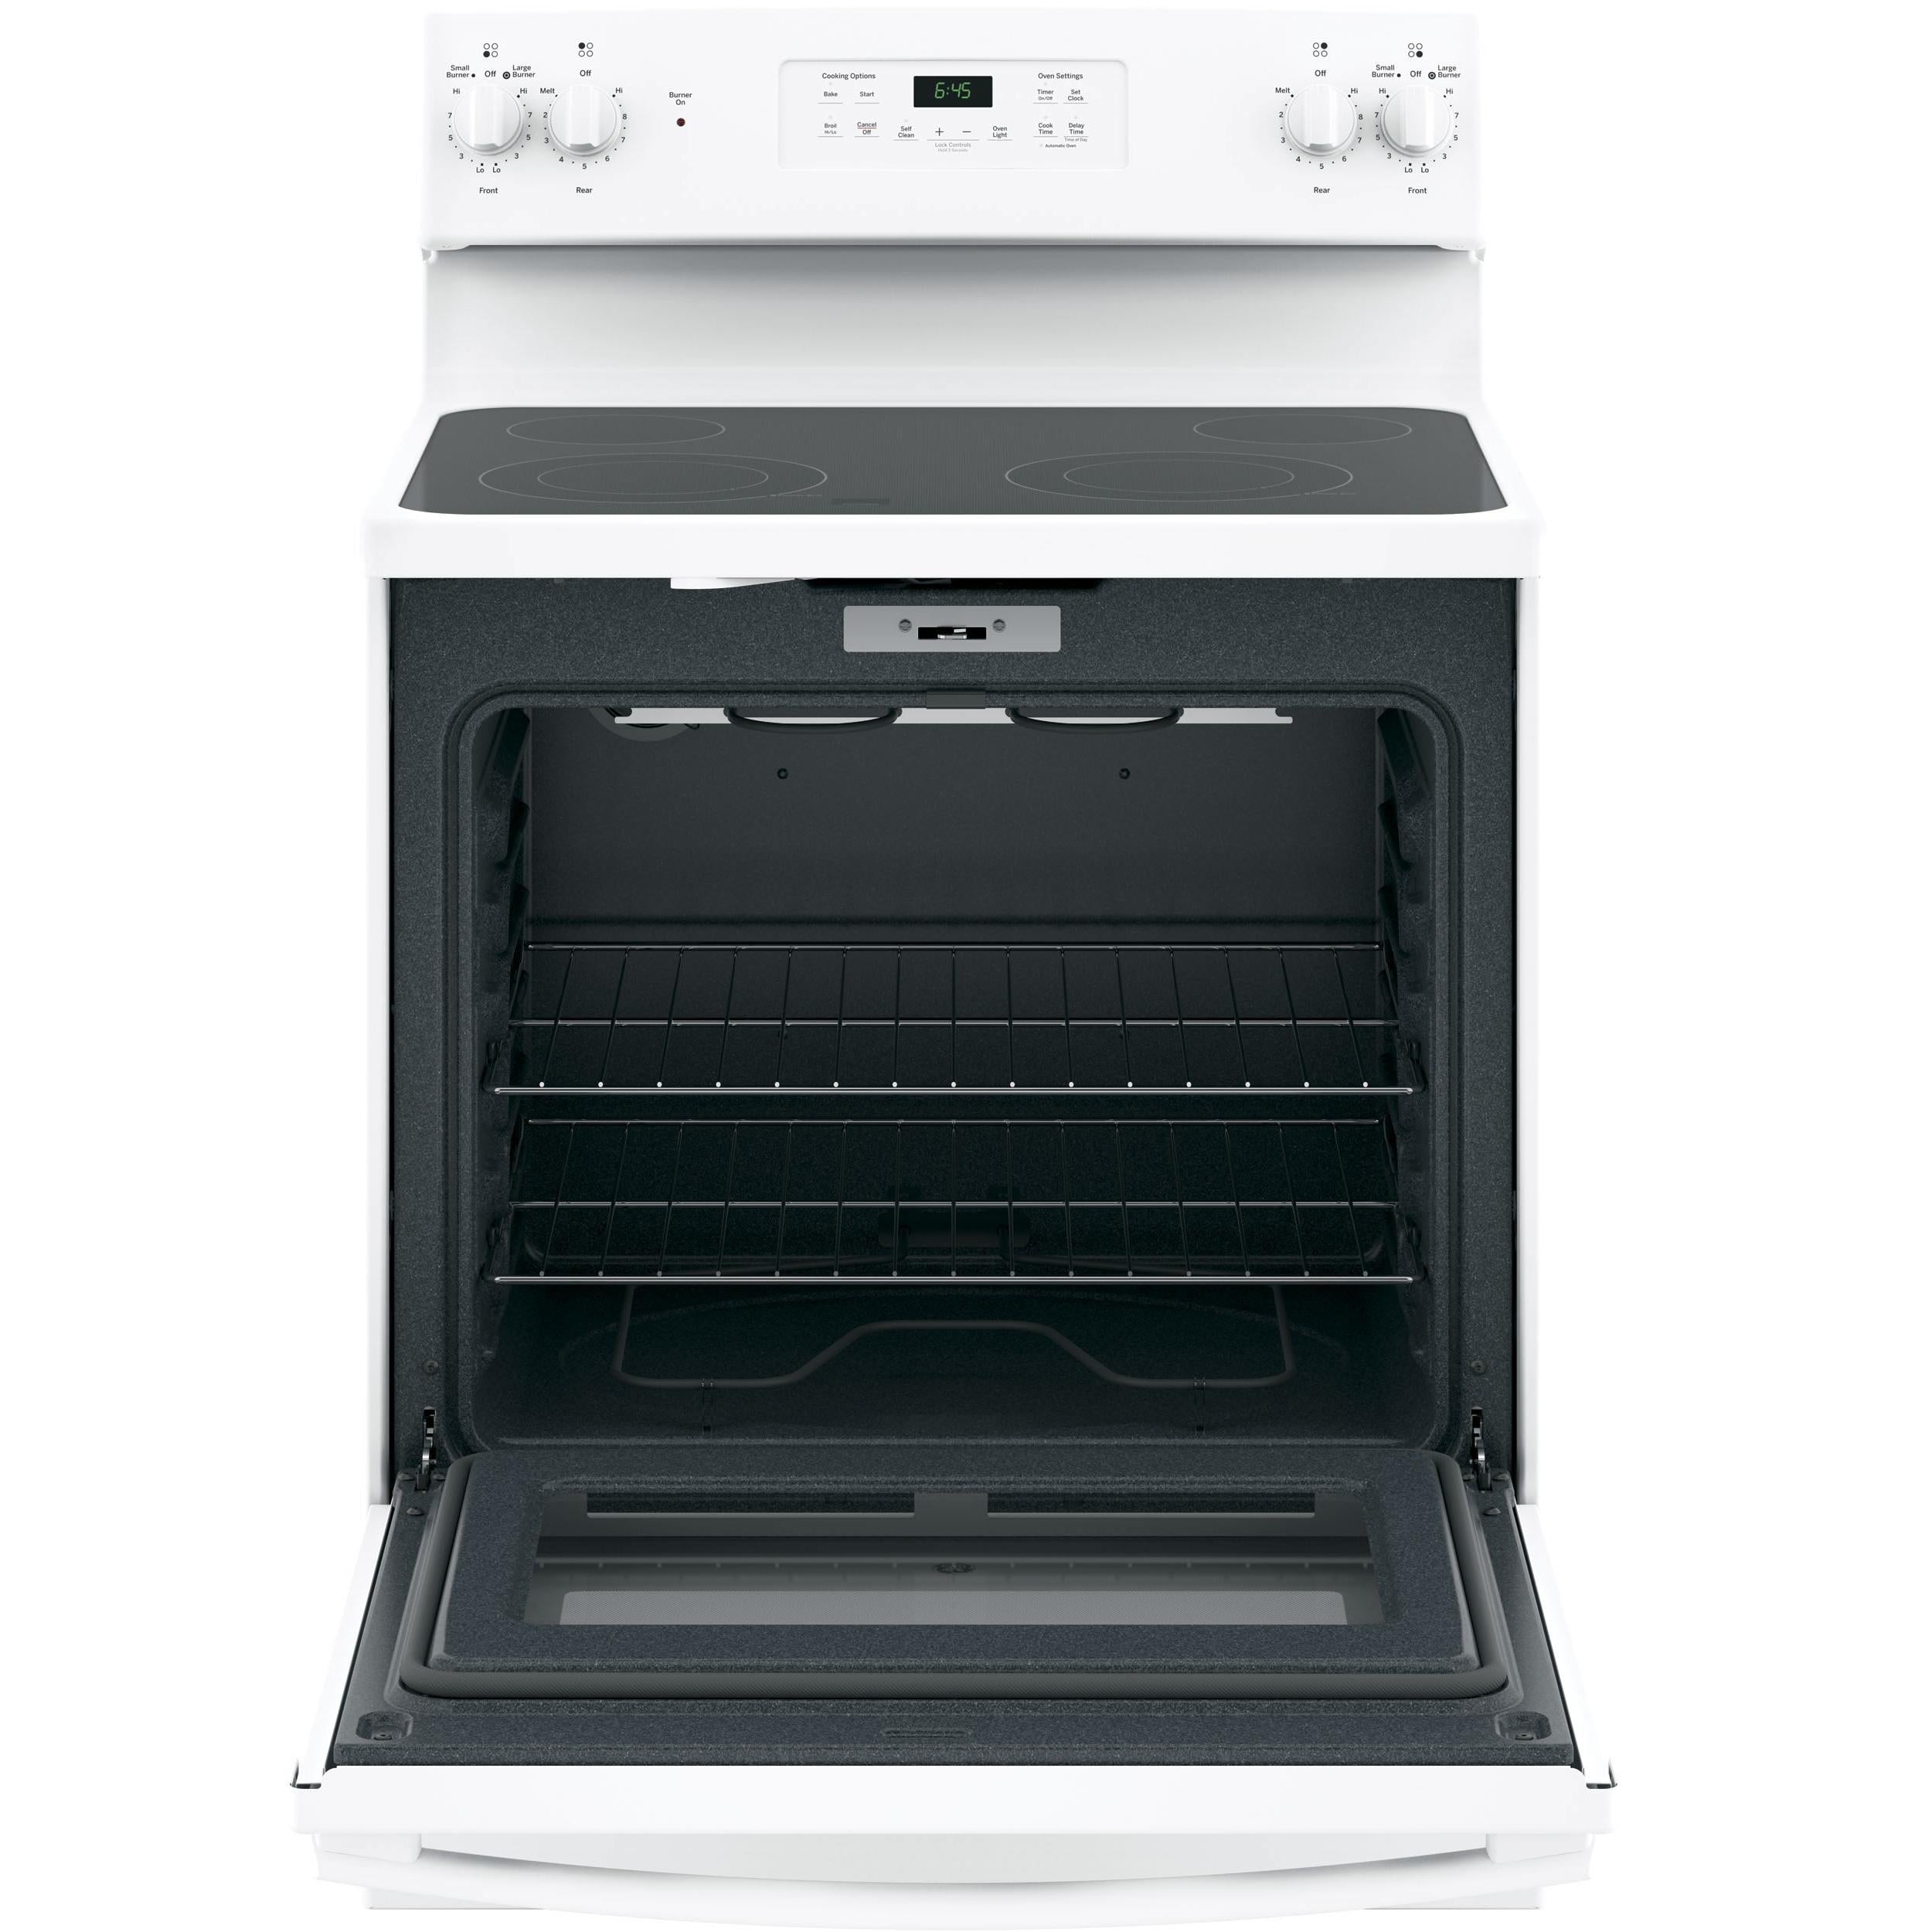 30-inch Freestanding Electric Range with Self-Clean Oven JB645DKWW